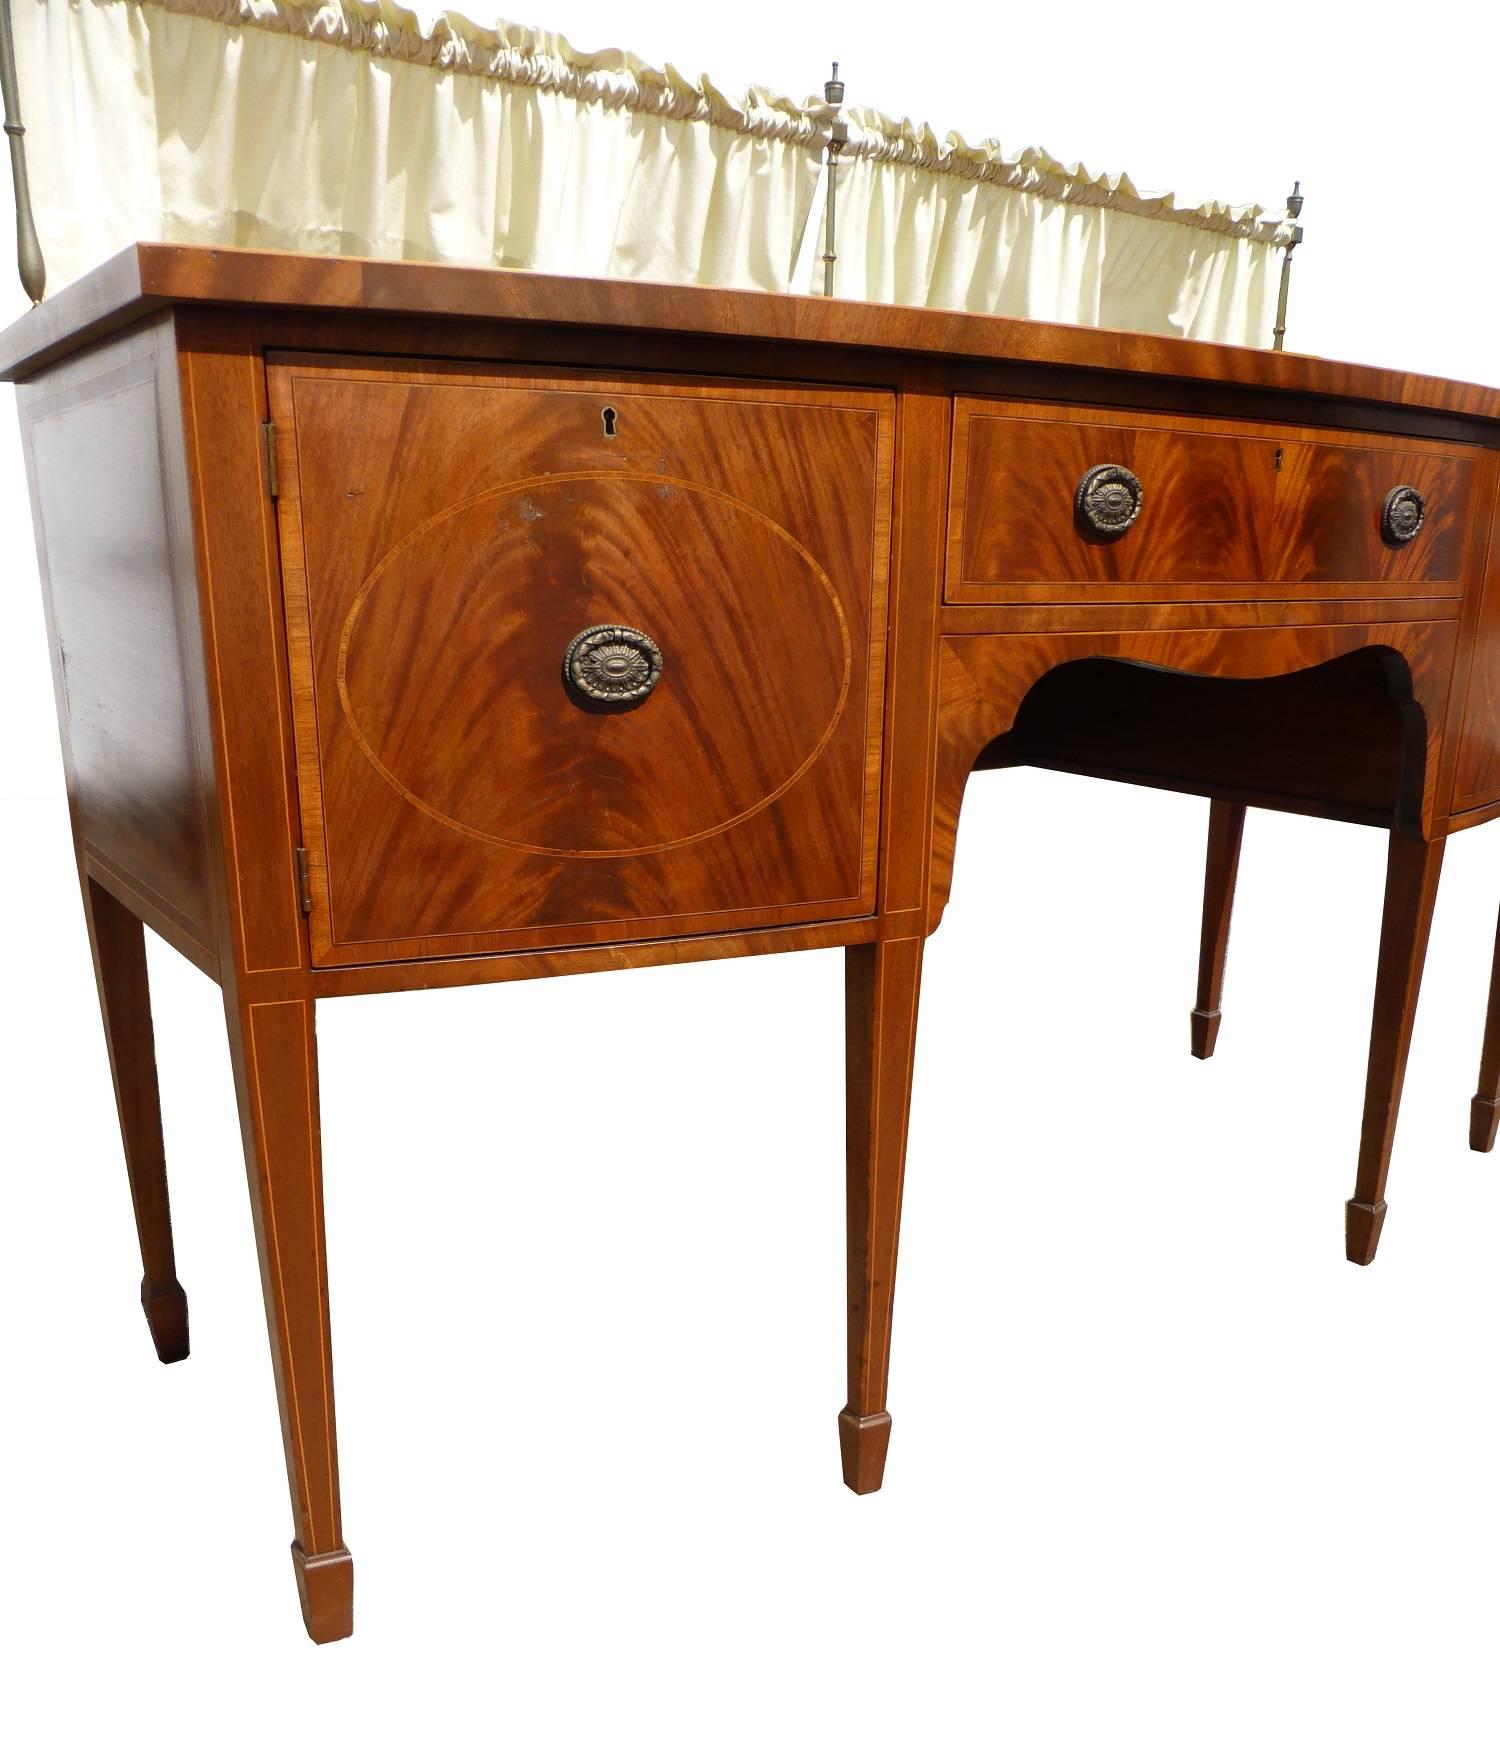 For sale is an Edwardian Regency style mahogany inlaid sideboard with a gallery back. The top of the sideboard has satinwood banding, above a long drawer in the centre which is flanked by a cupboard on either side. This item stands on tapering legs